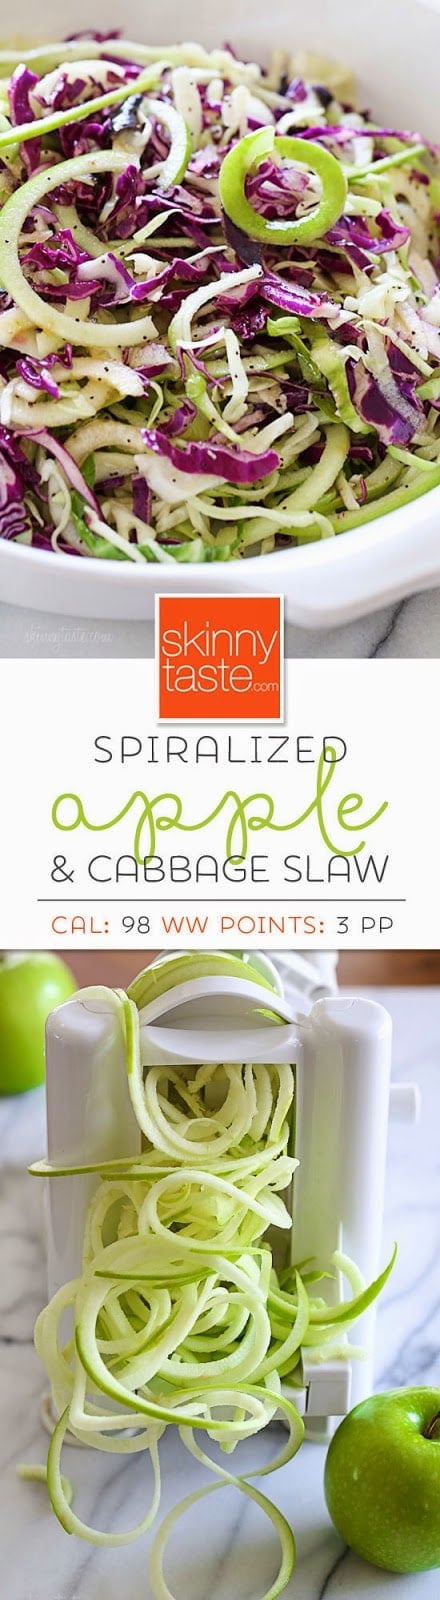 Spiralized Apple and Cabbage Slaw – Quick, easy and delicious!